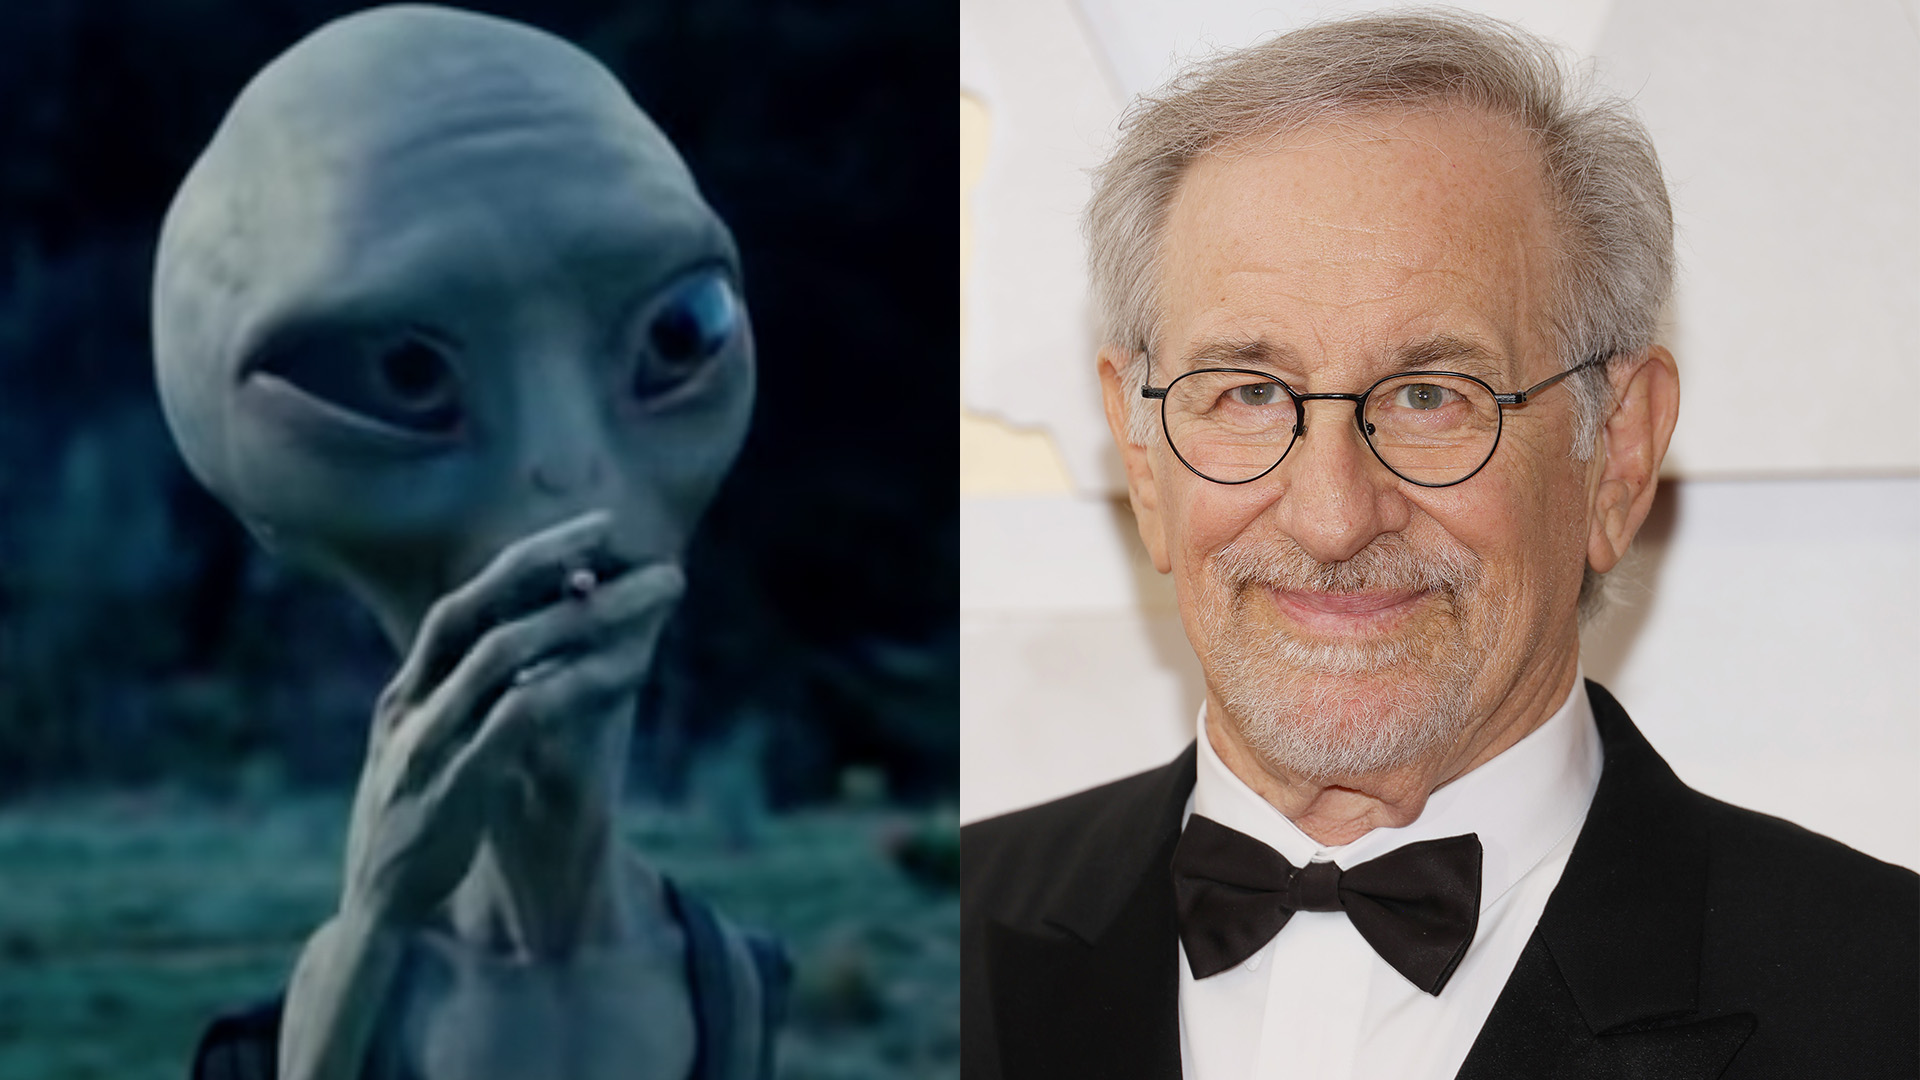 Paul director & Simon Pegg on making that Spielberg cameo